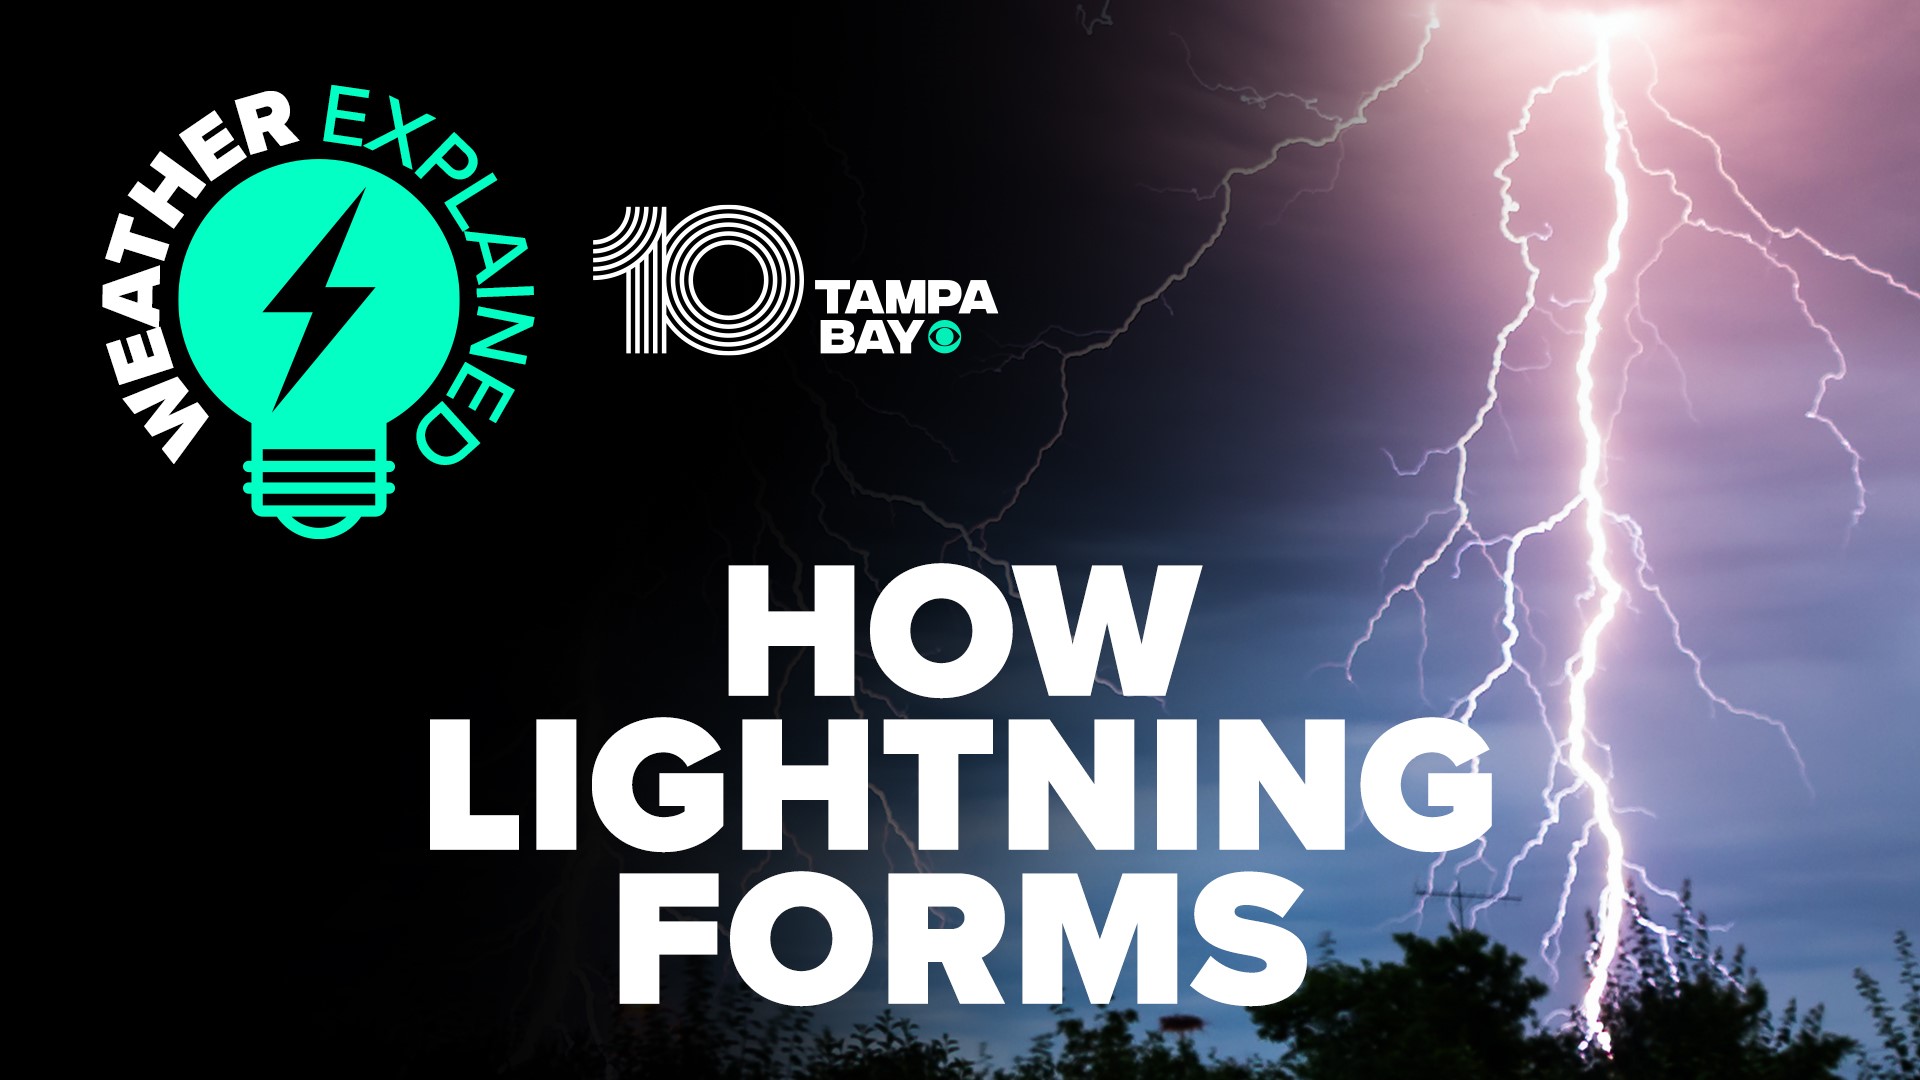 Meteorologist Natalie Ferrari explains how charges separate in clouds, leading to the formation of lightning.